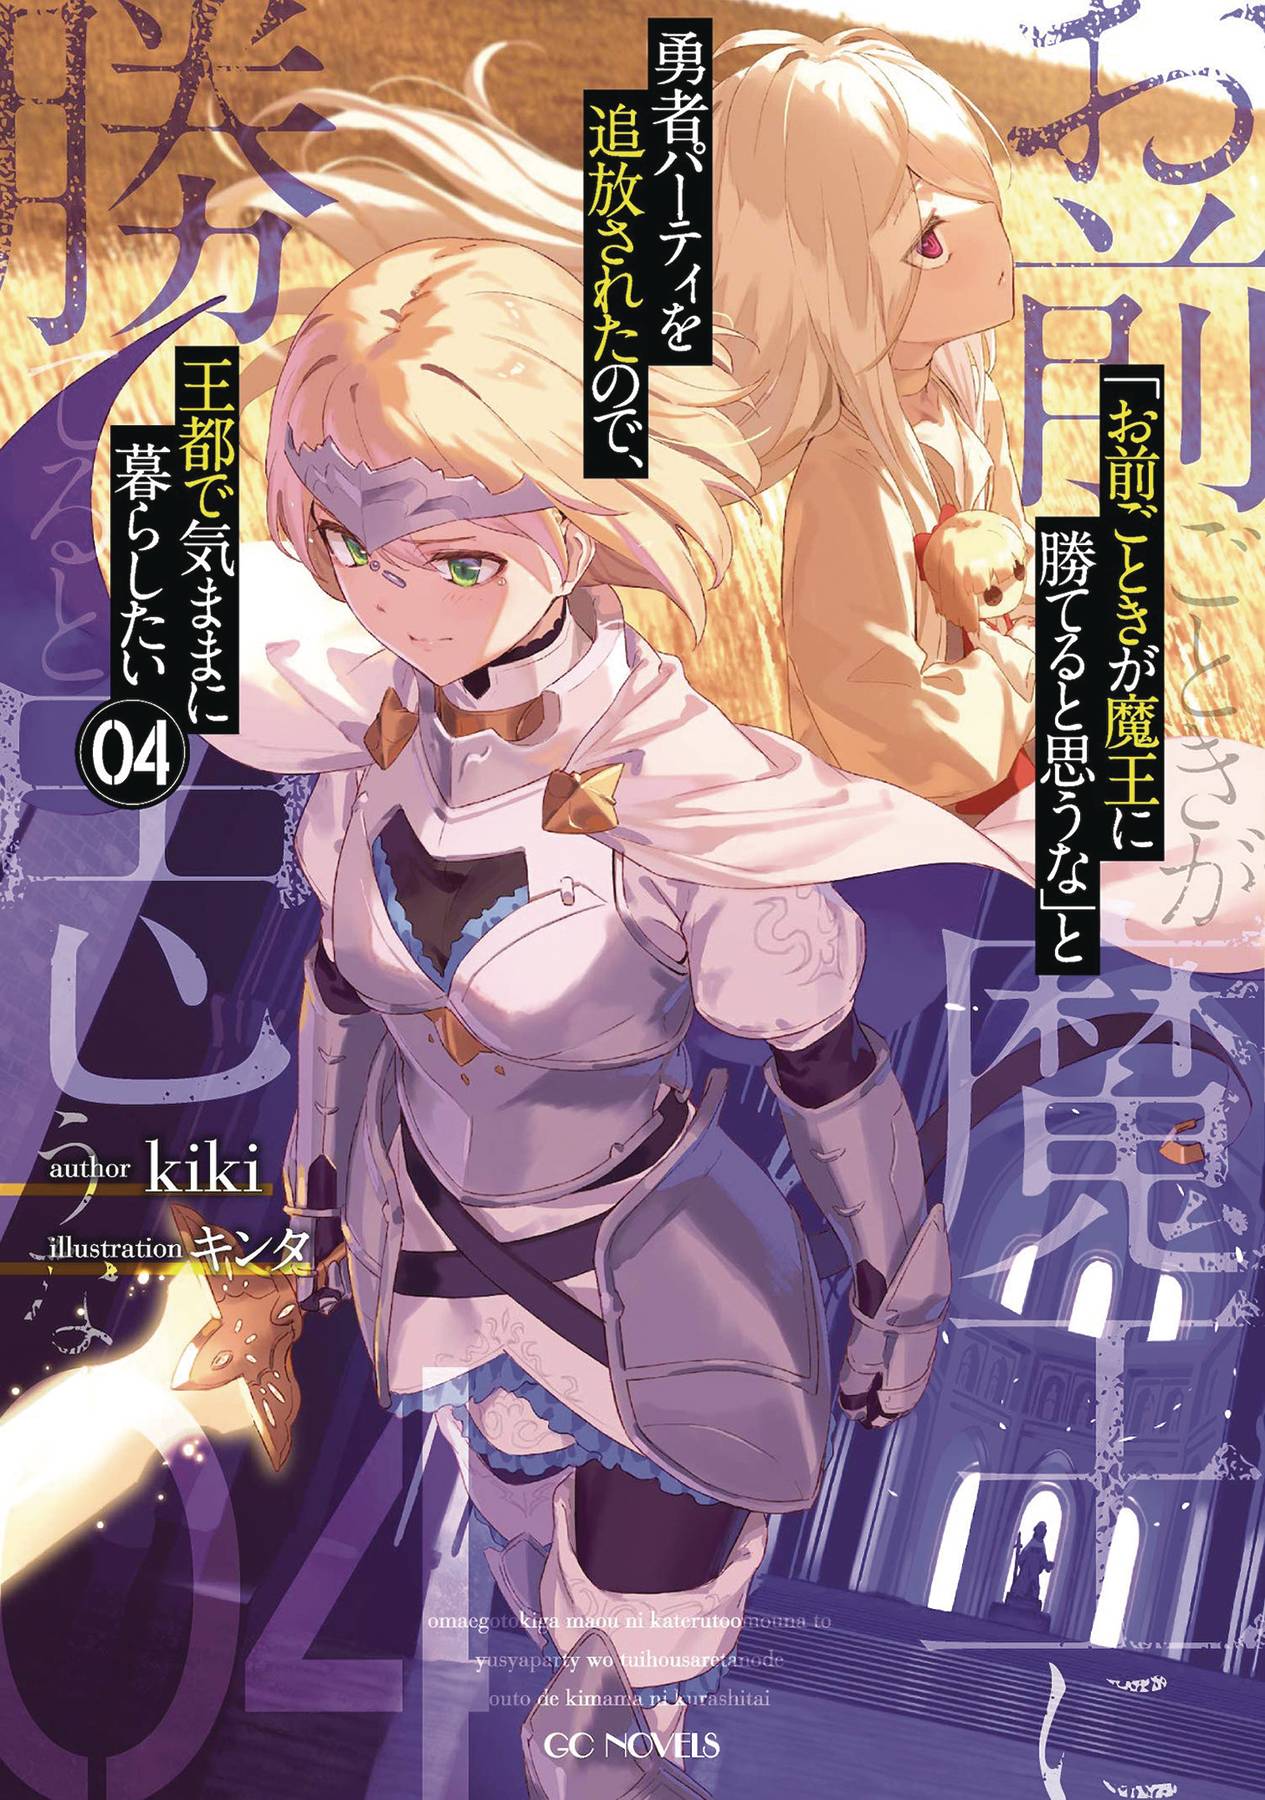 MAY212018 - ROLL OVER AND DIE LIGHT NOVEL VOL 04 - Previews World